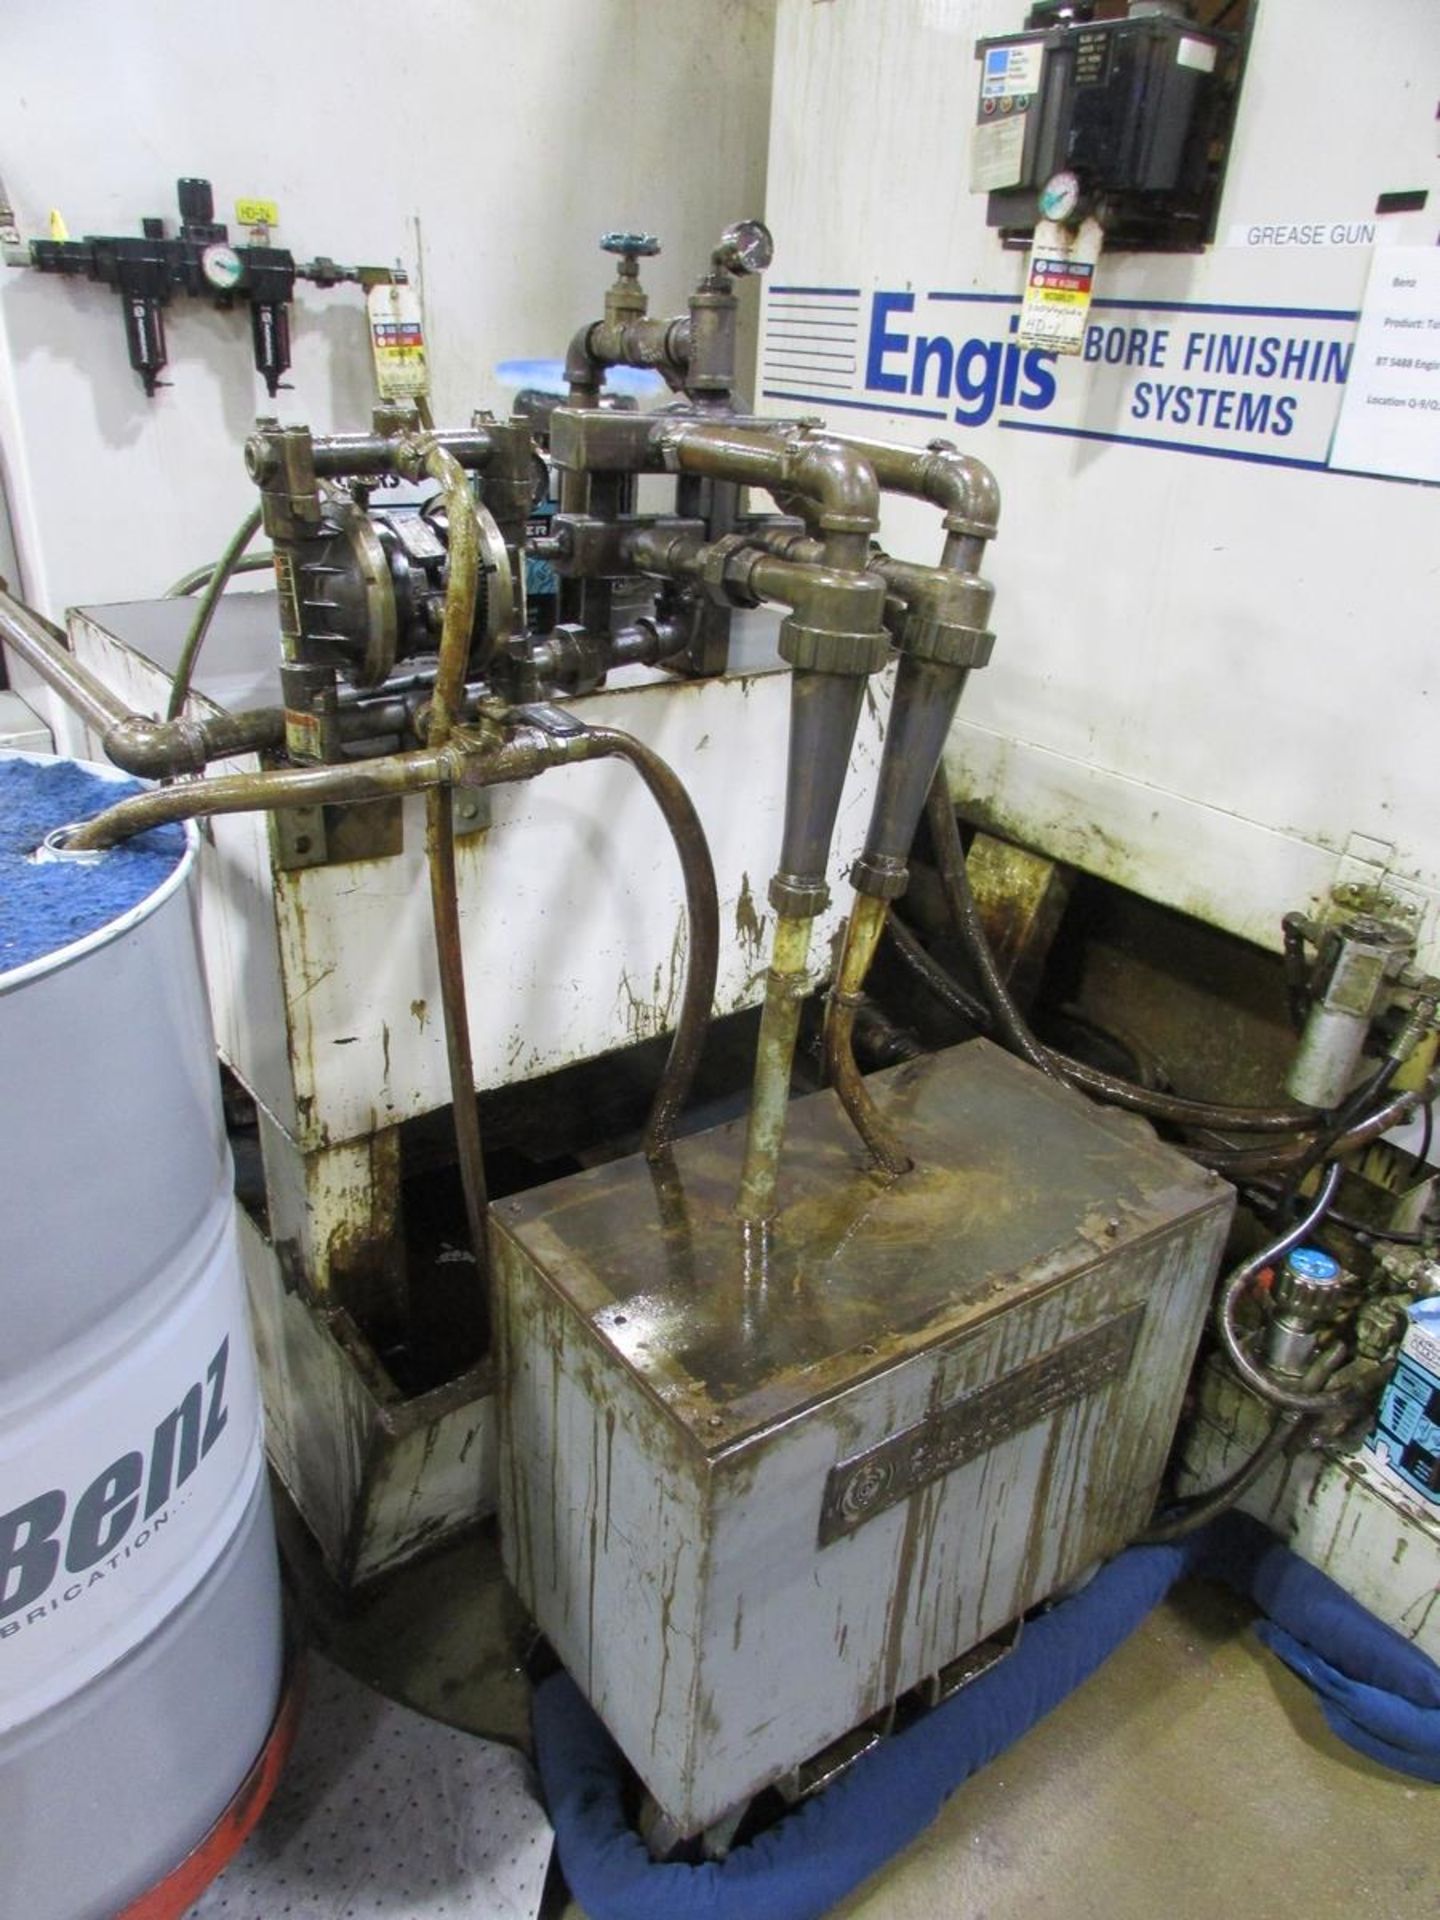 Universal Automatic Machine/ Engis Bore Finishing Systems 9825 16S 6-Spindle Single Column Vertical - Image 11 of 17